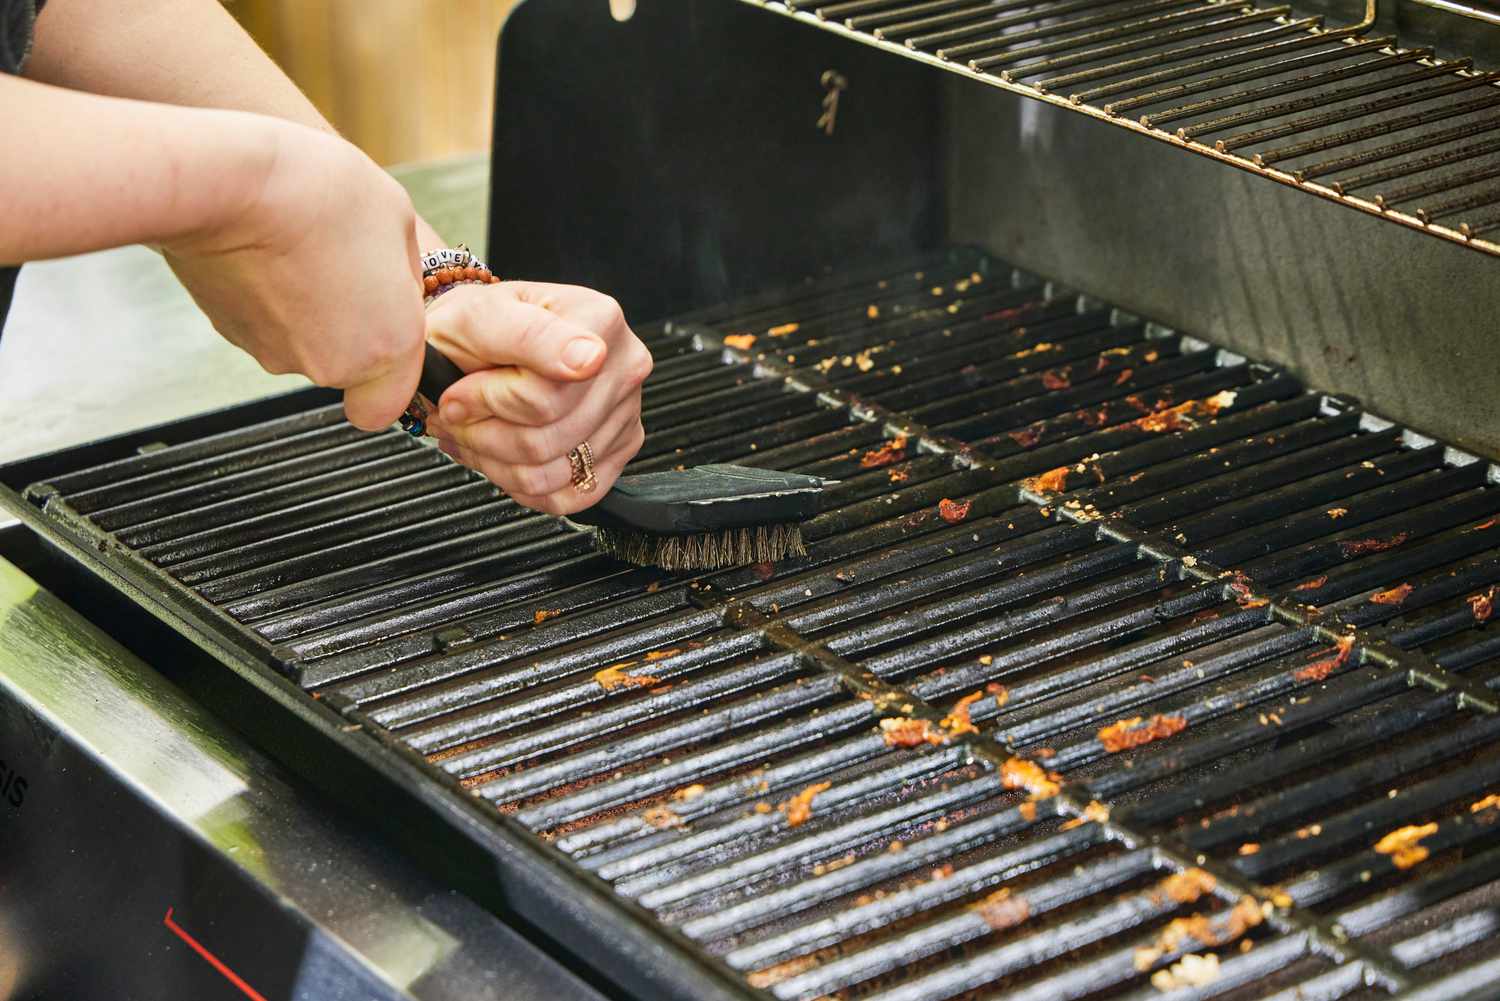 A person cleans the Weber Genesis E-325 Liquid Propane Gas Grill with a grill brush